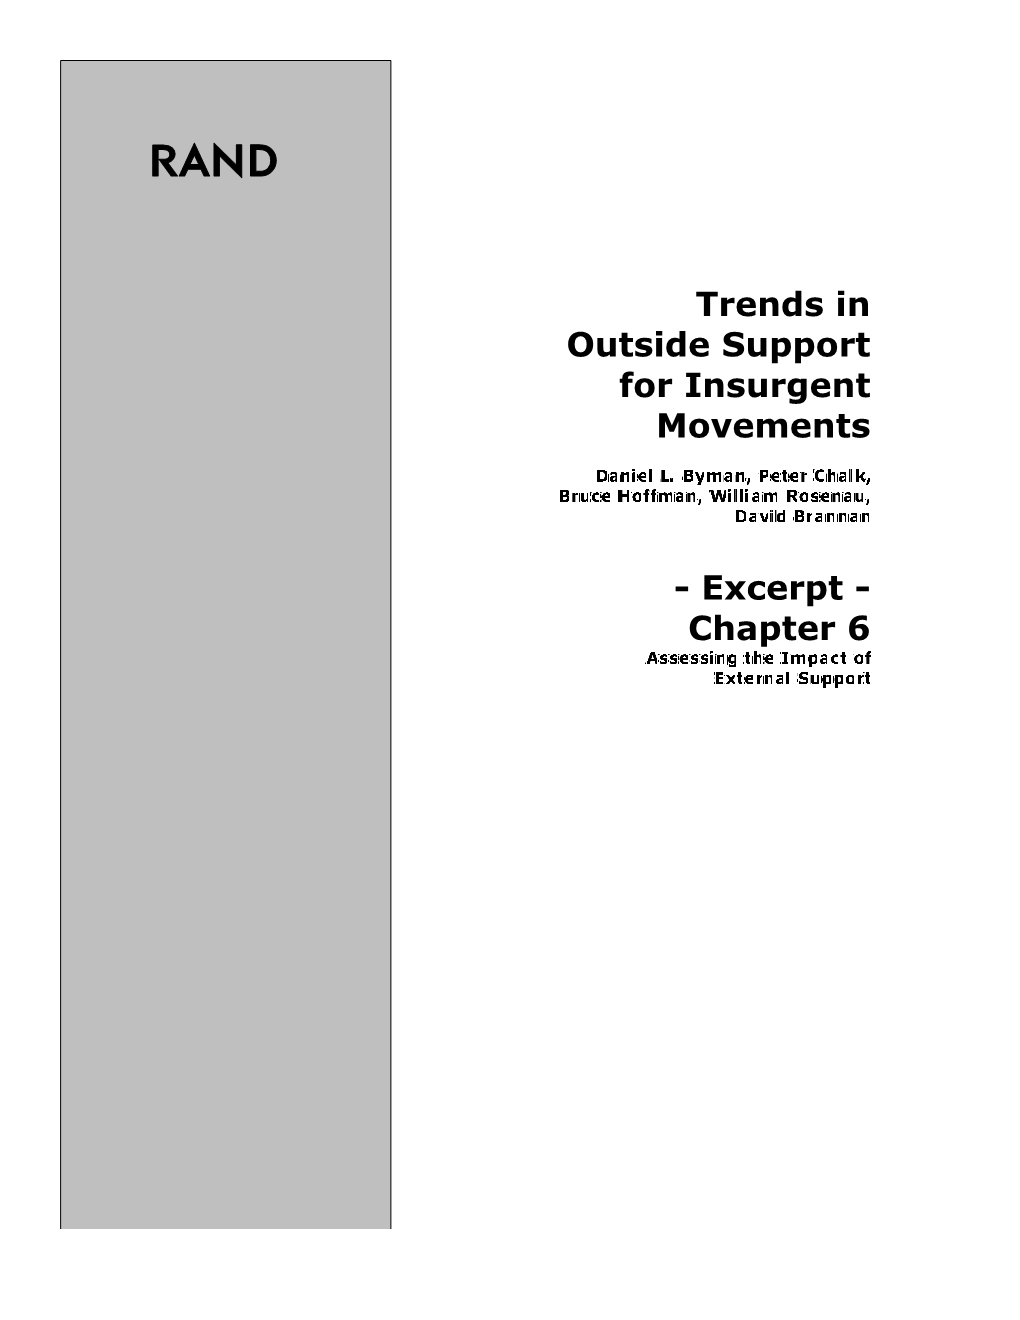 Trends in Outside Support for Insurgent Movements | Chapter 6: Assessing the Impact of External Support - Daniel L